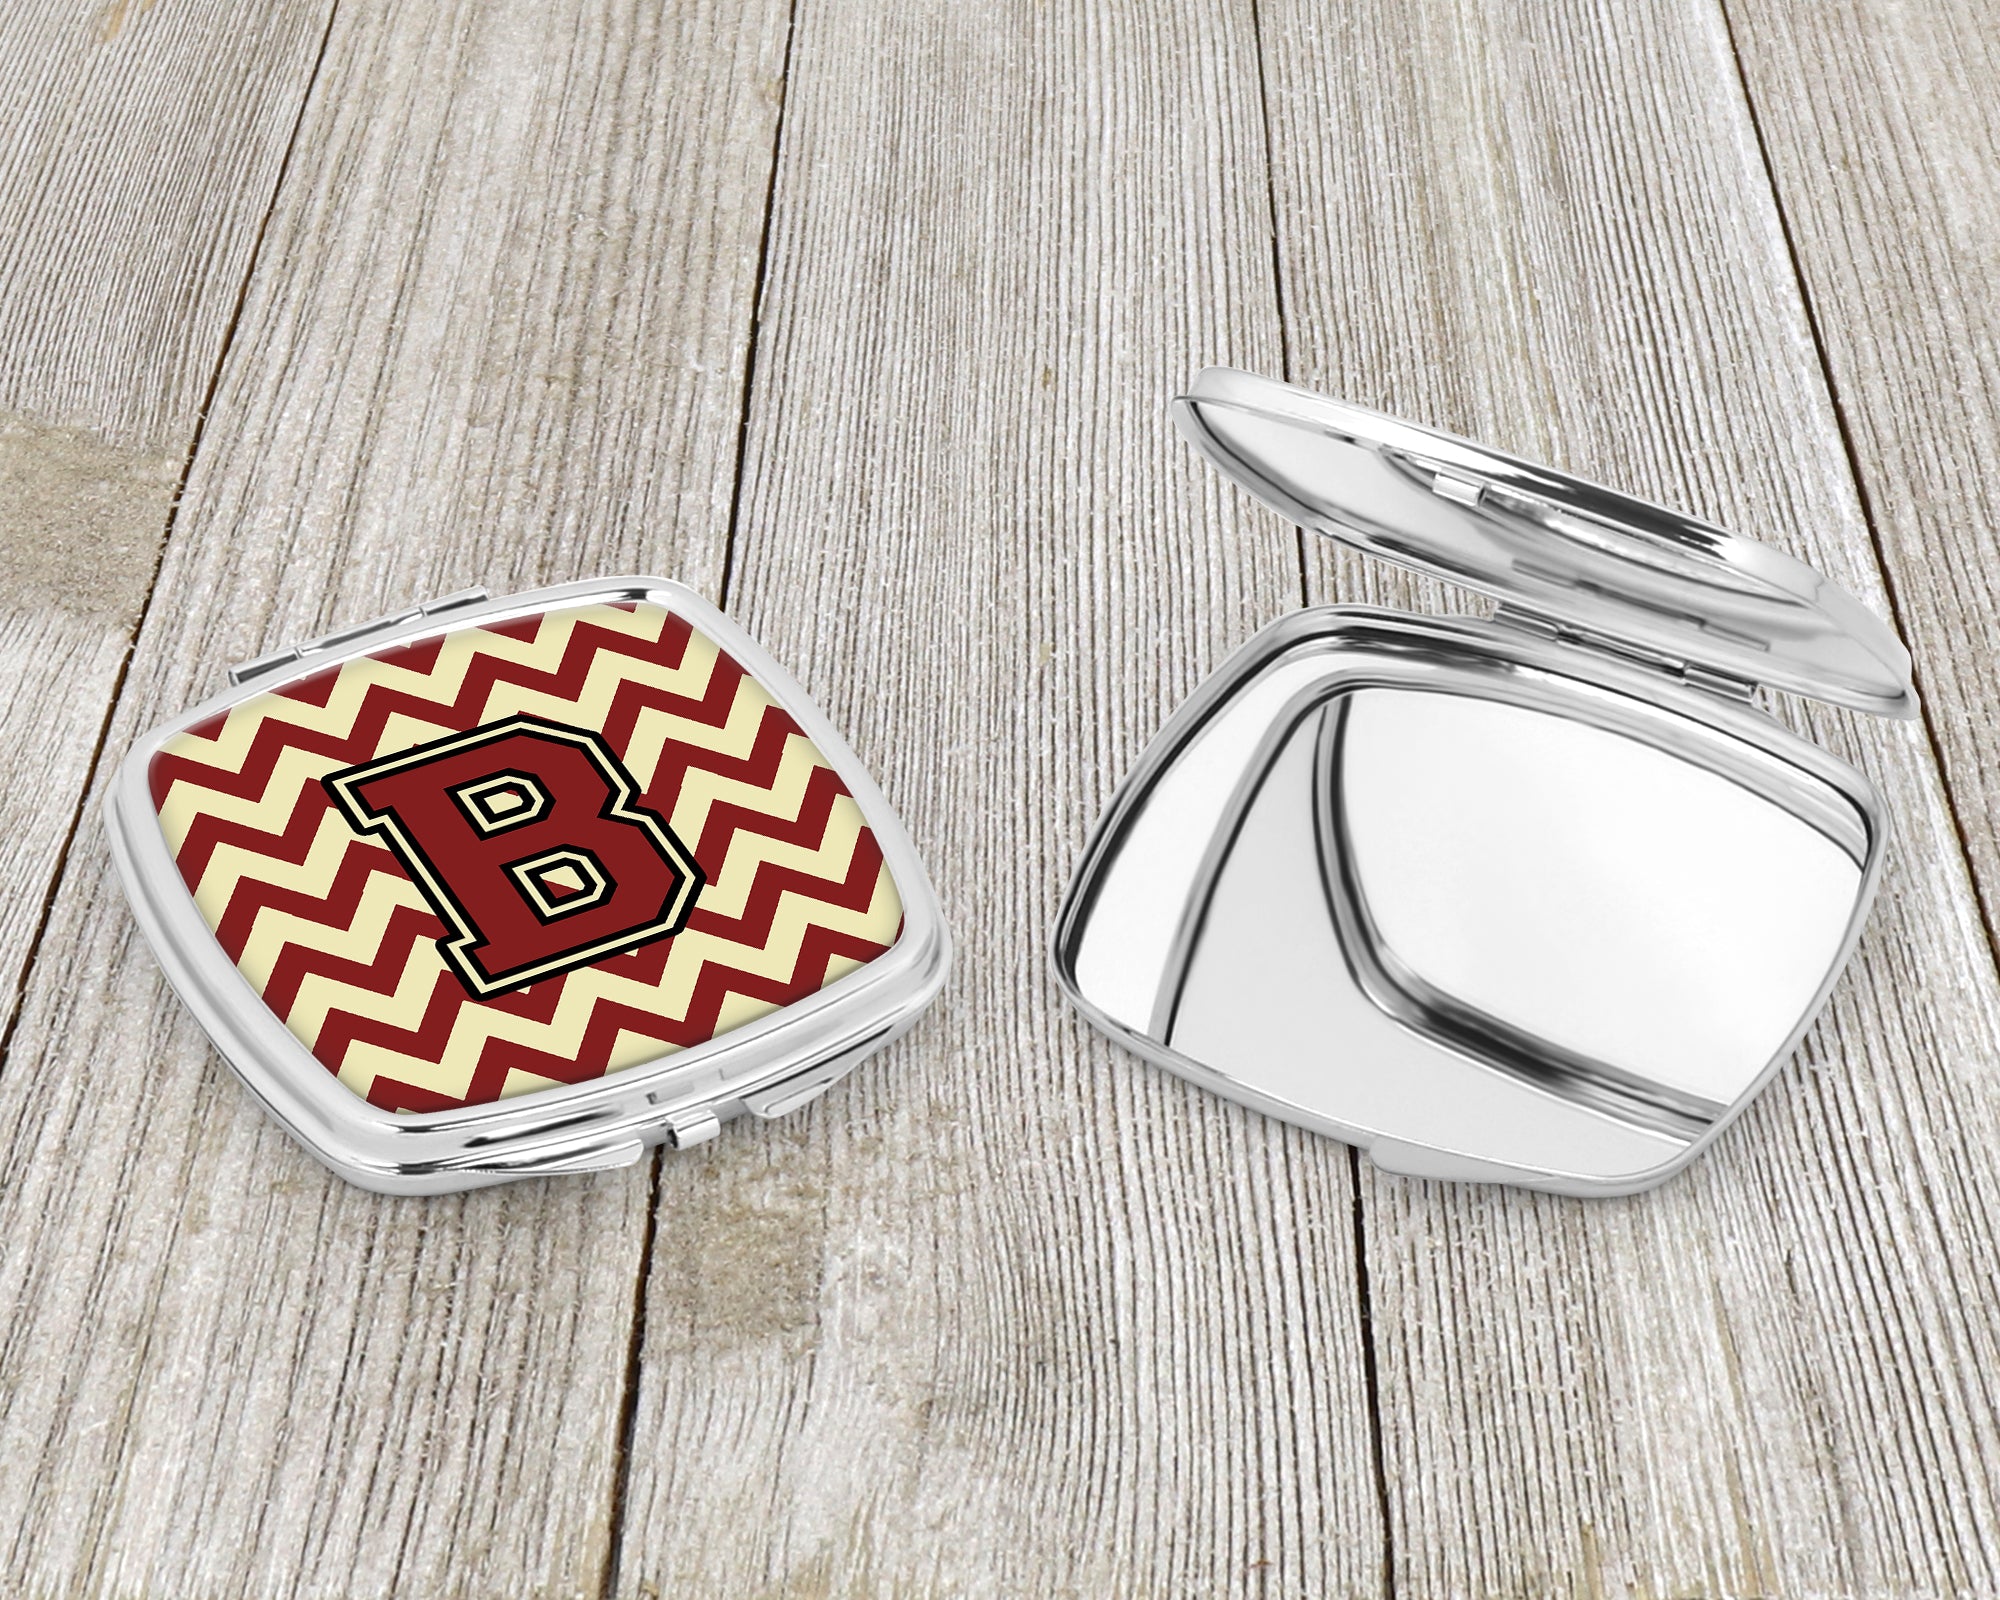 Letter B Chevron Maroon and Gold Compact Mirror CJ1061-BSCM